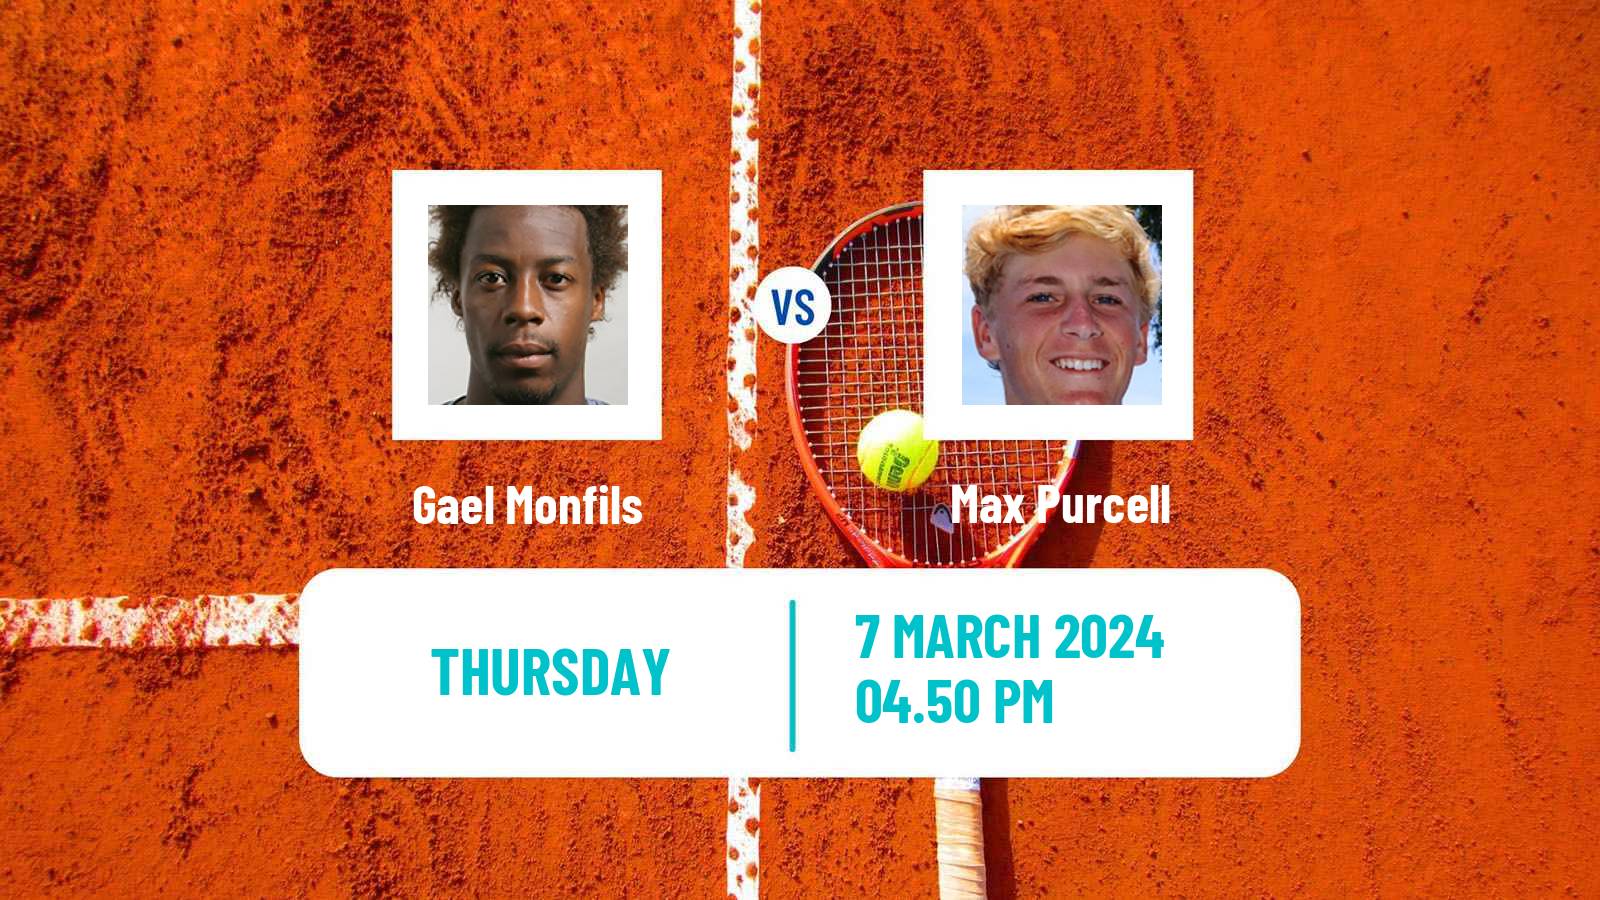 Tennis ATP Indian Wells Gael Monfils - Max Purcell